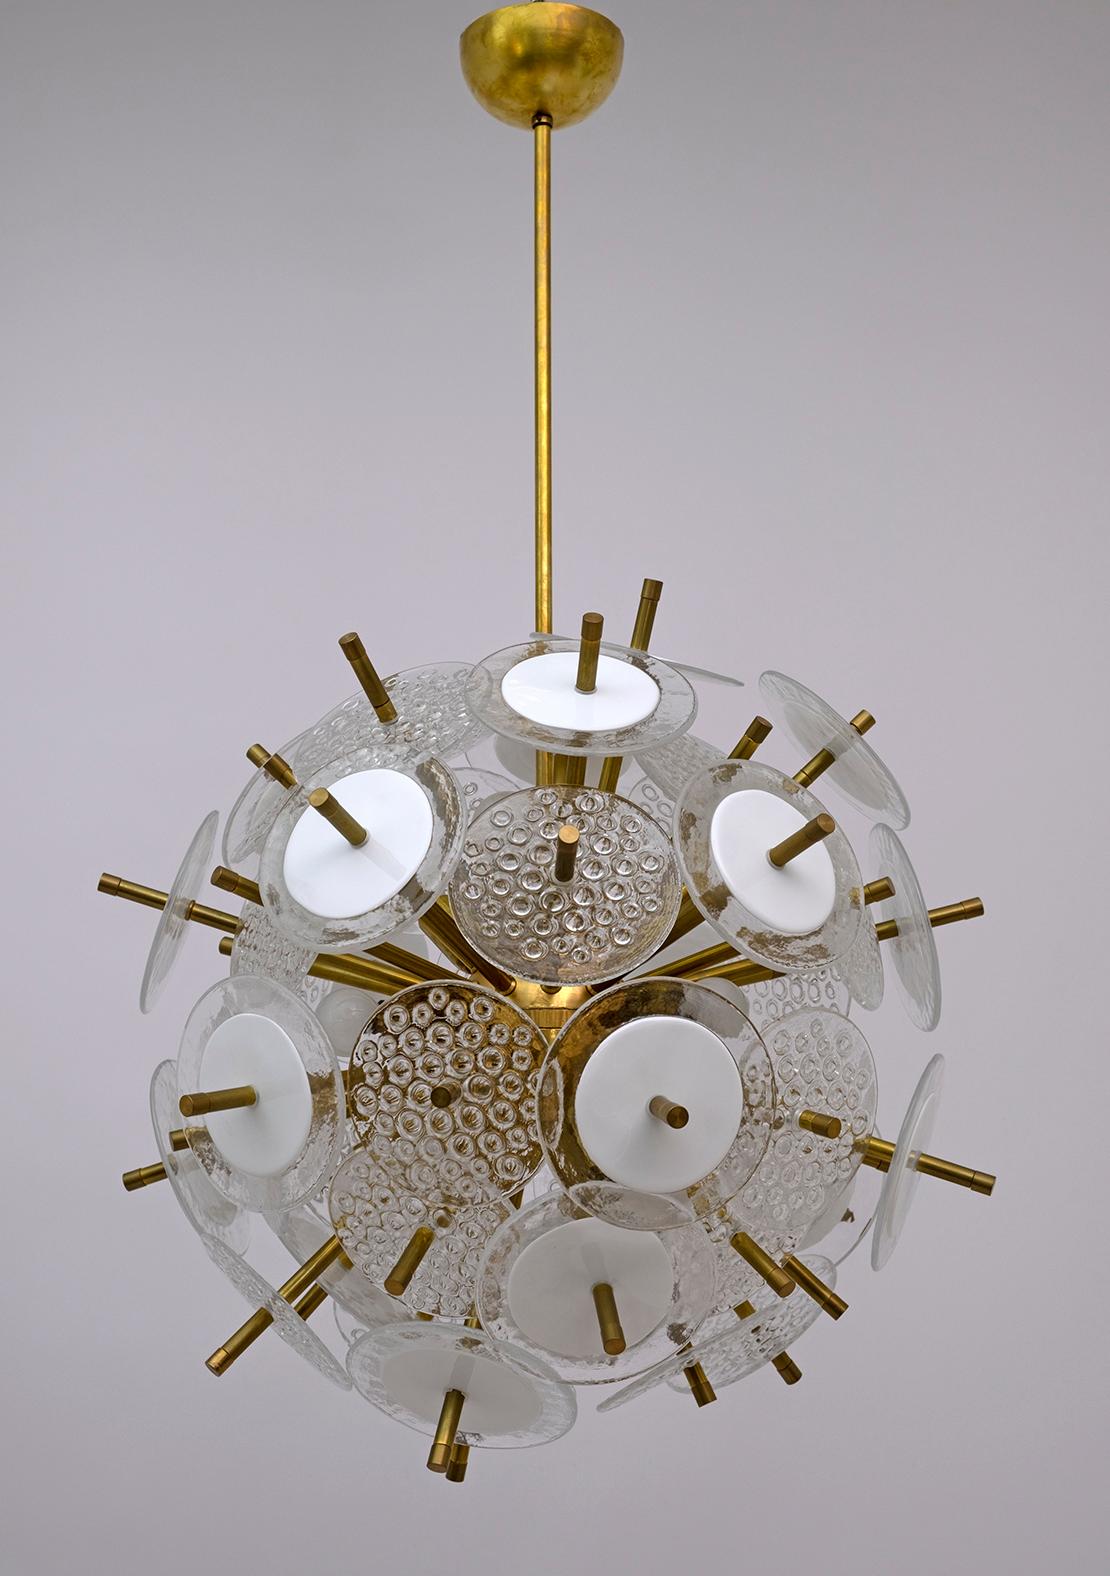 This sophisticated modernist Sputnik chandelier by Vistosi has a satin brass structure with a spherical core from which it frees itself very well. At the end of each rod is a white hand blown Murano glass disc surrounded by a translucent perimeter